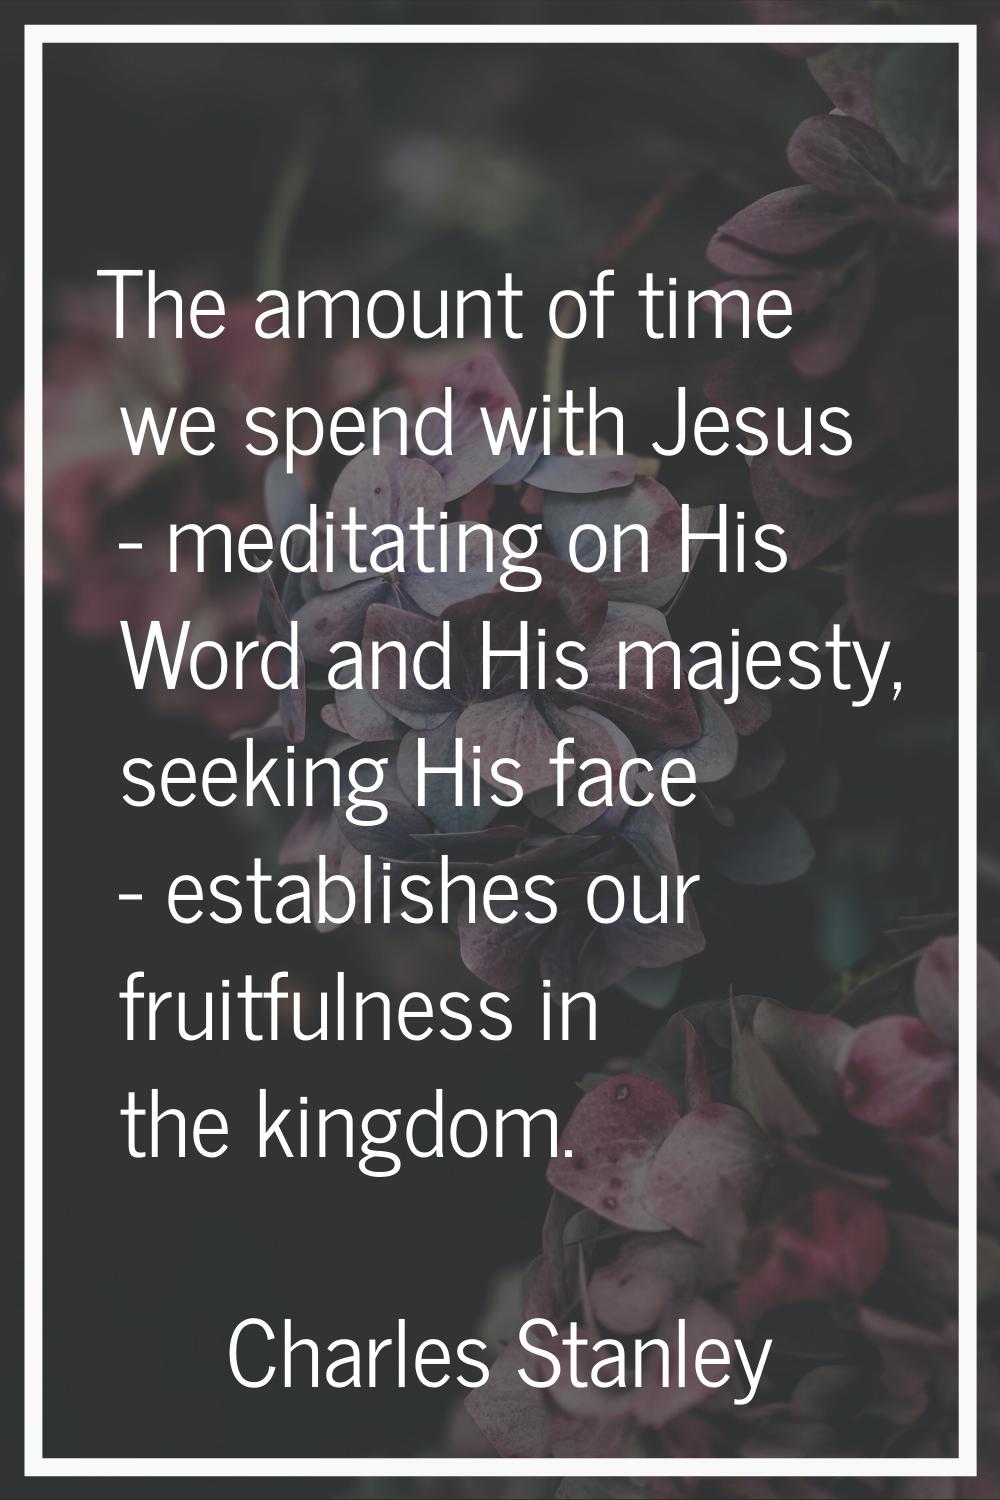 The amount of time we spend with Jesus - meditating on His Word and His majesty, seeking His face -